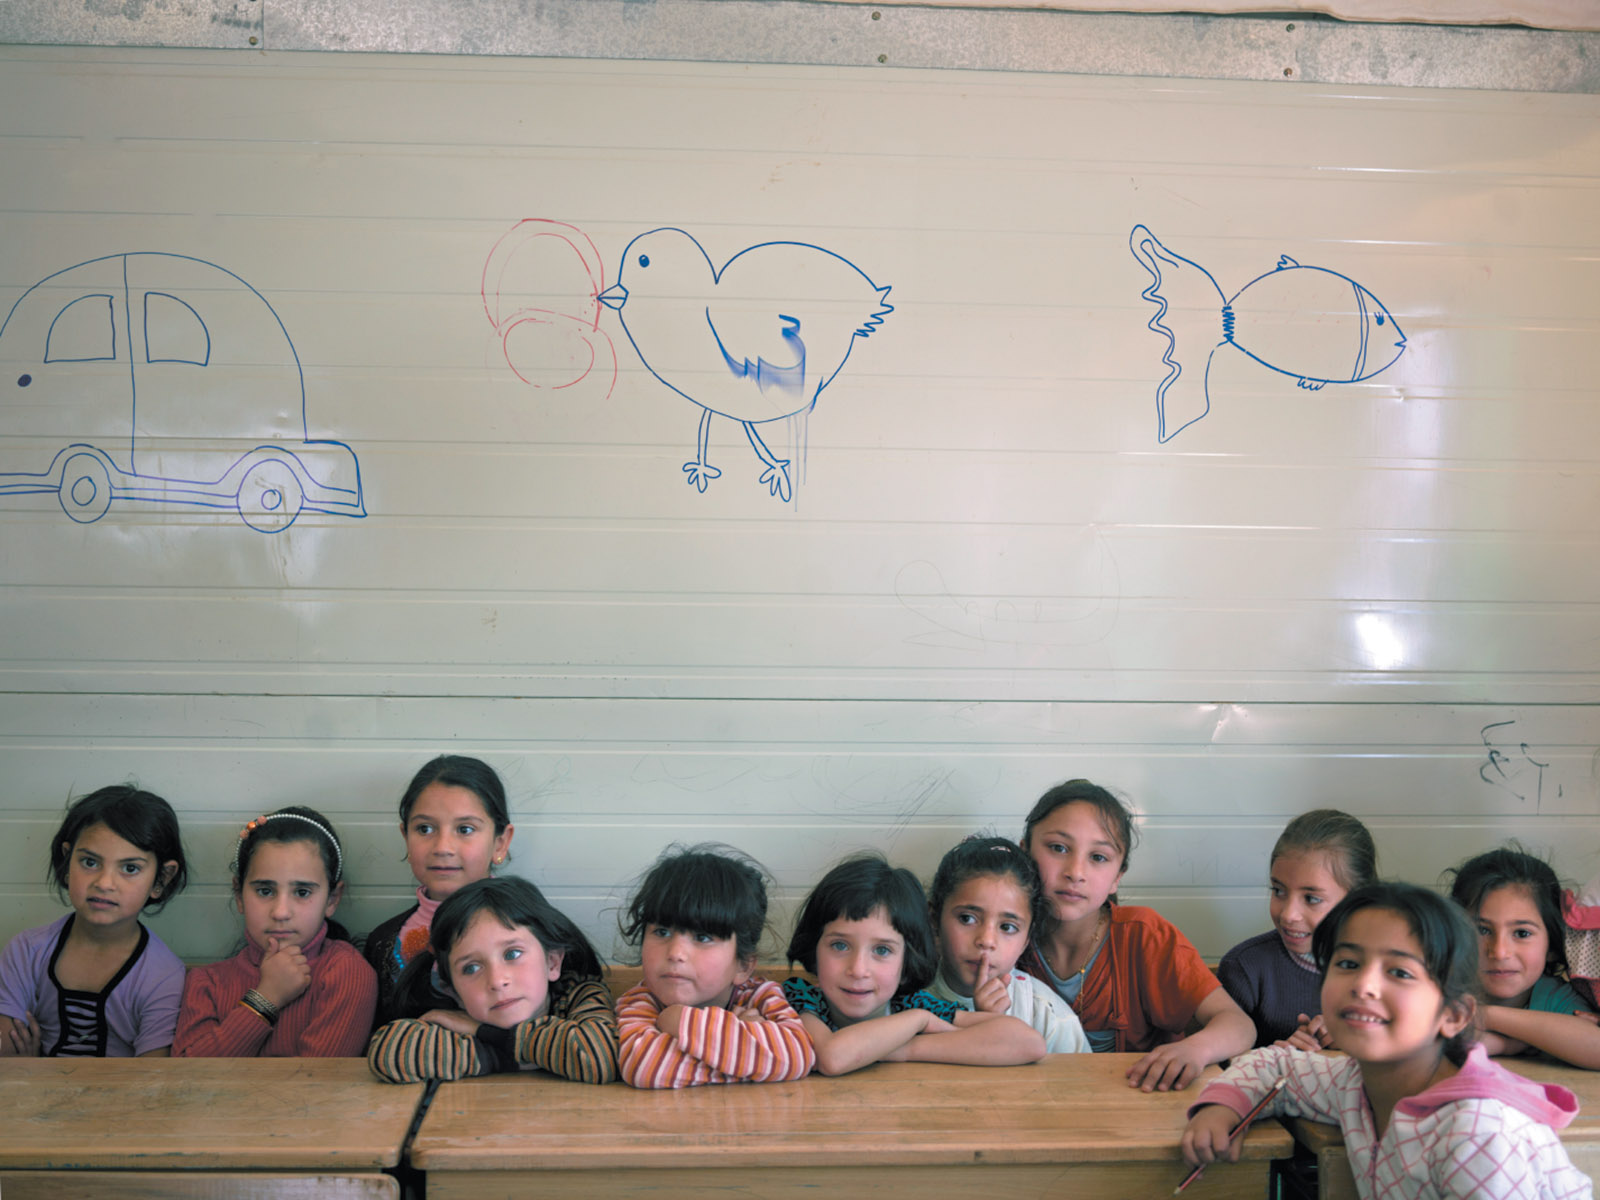 Syrian children at a school in the Zaatari refugee camp, near Mafraq, Jordan, April 2016. Several members of the staff receive pay through UNICEF’s cash-for-work program, managed by the United Nations Office for Project Services.